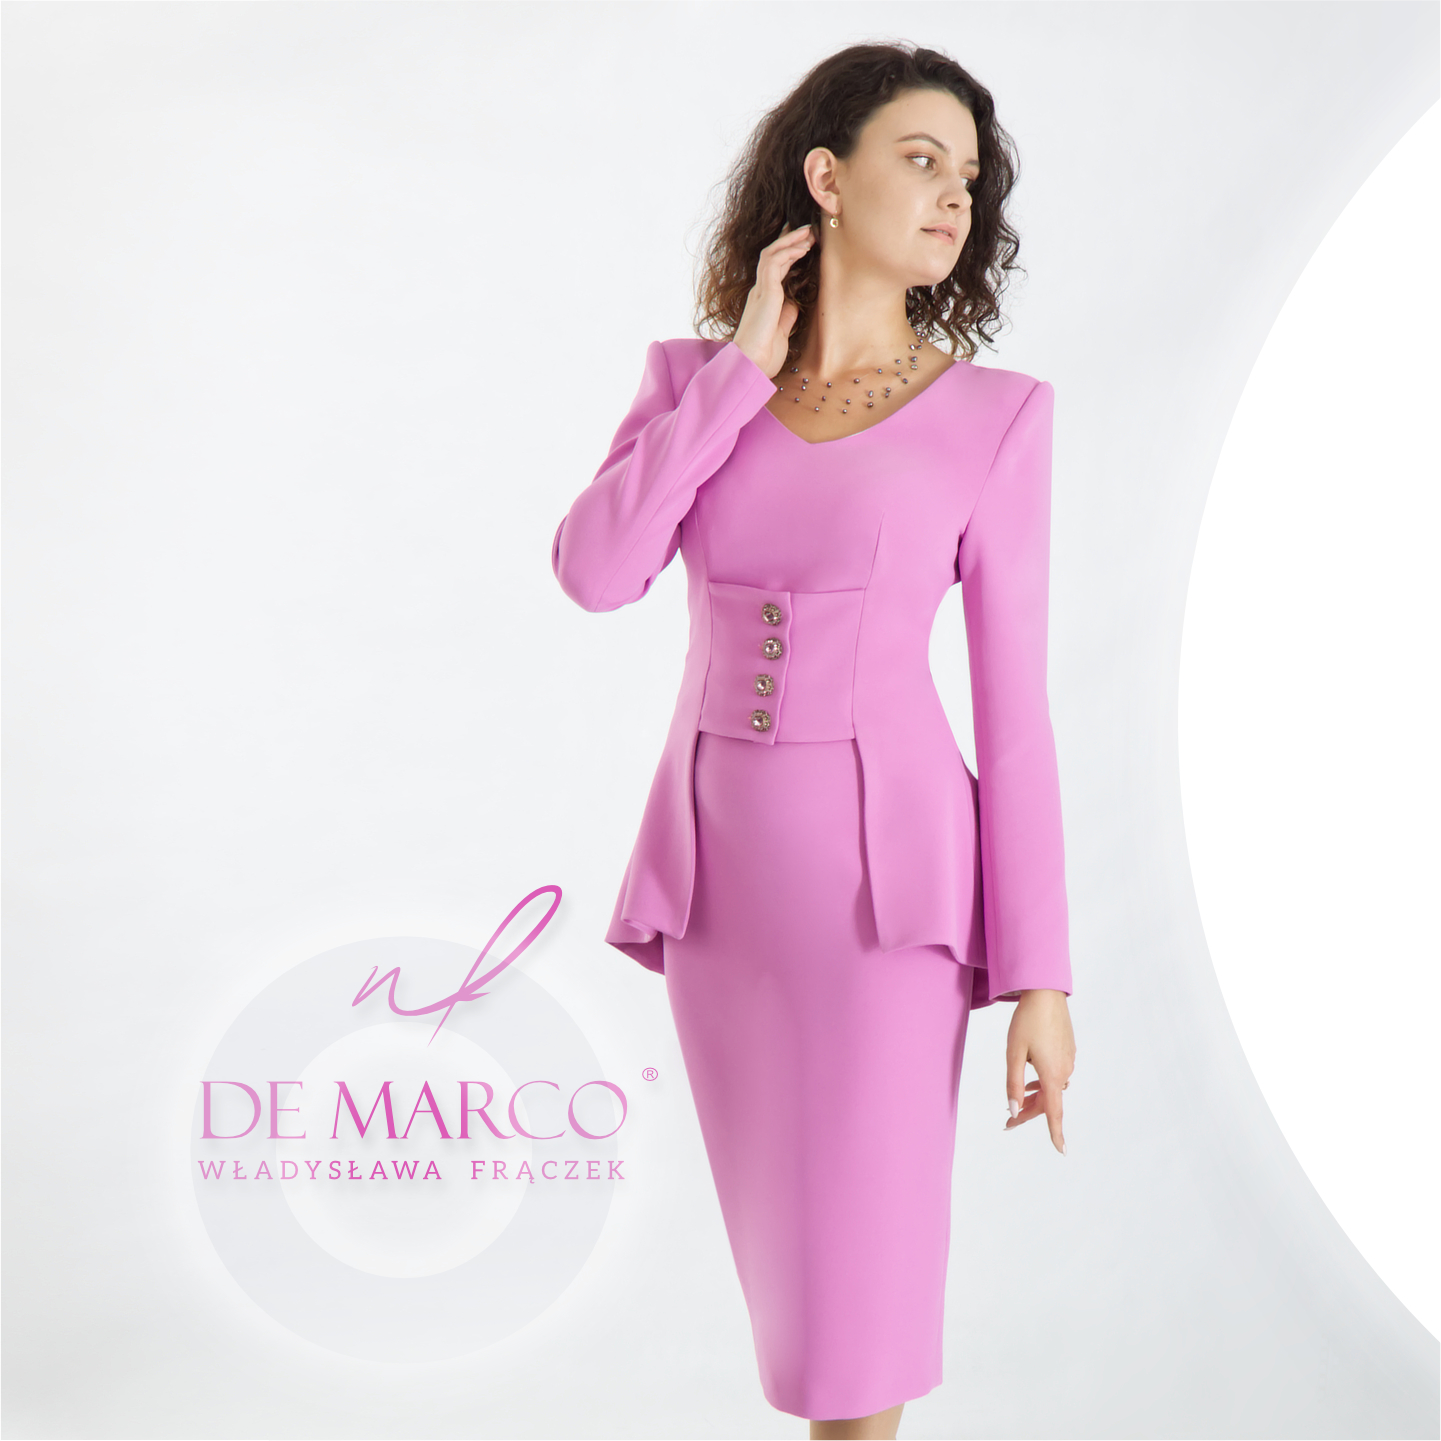 Exclusive formal suits for mum and mother-in-law weddings. De Marco made-to-measure